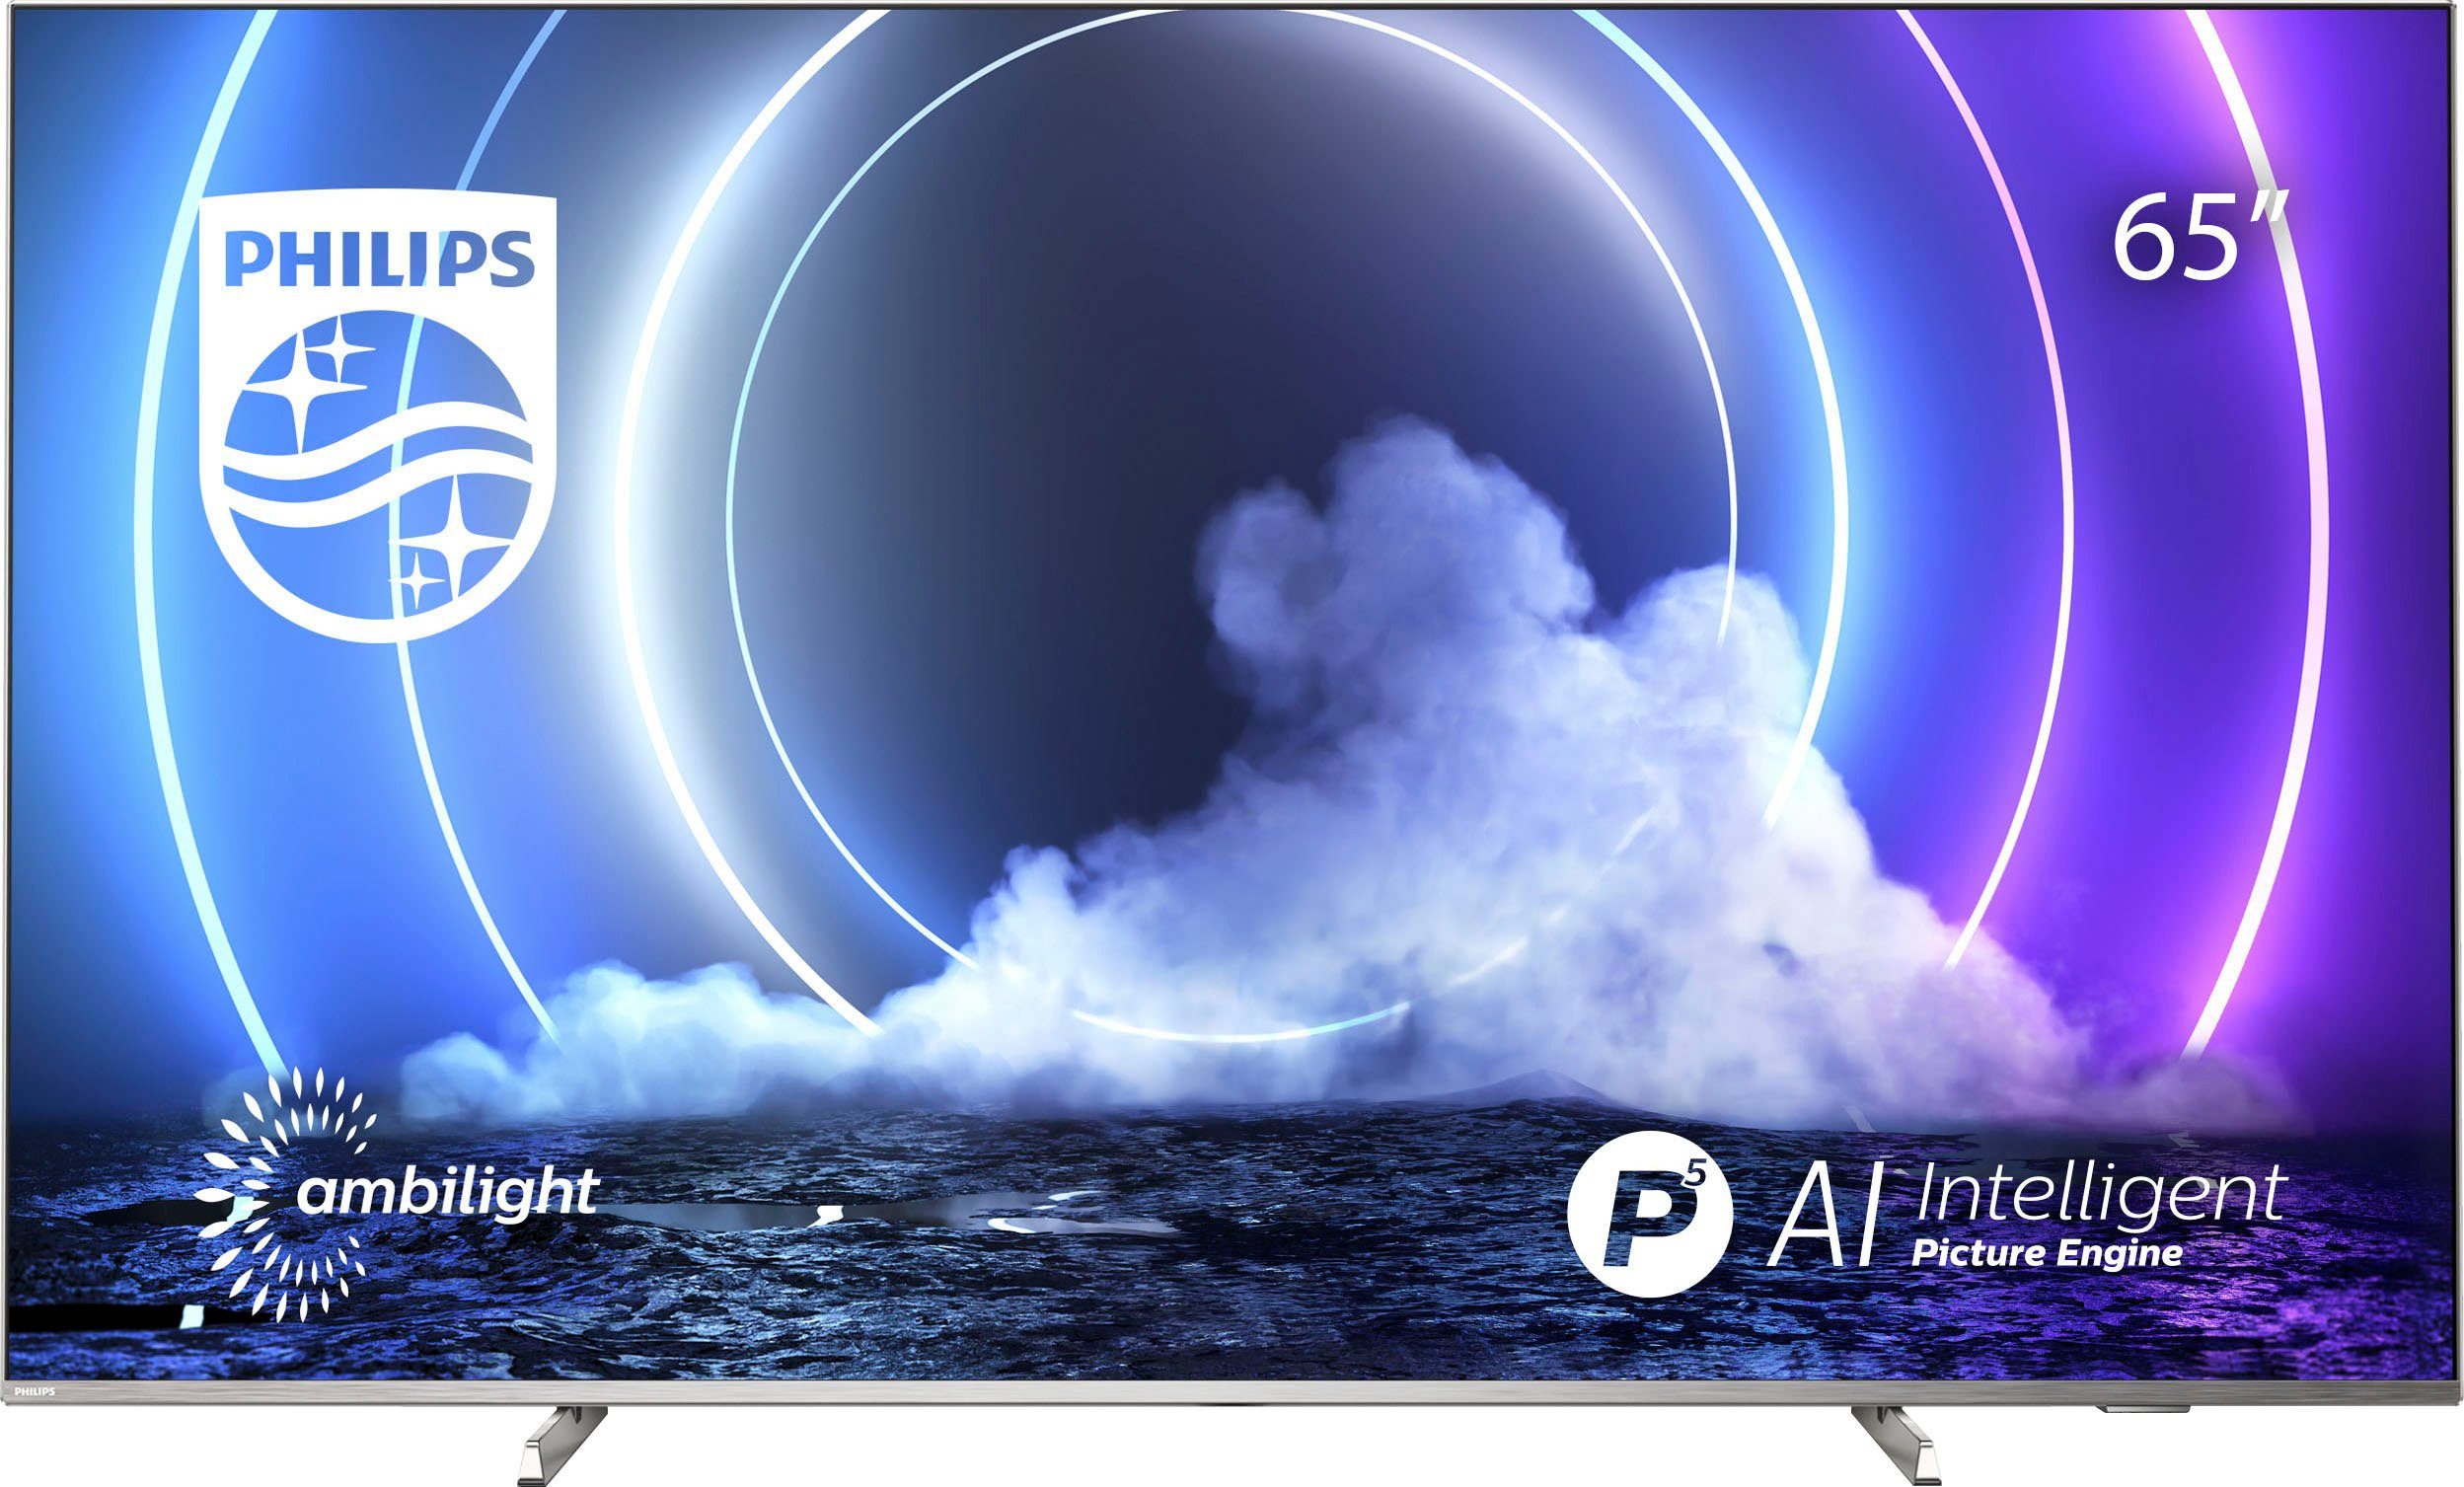 Prime, 4K Amazon HbbTV, Philips HDR10+ Ultra LED-Fernseher TV, Smart Smart-TV), USB-Aufnahme, Android, HD, (164 Zoll, TV, 65PML9506/12 Spotify, cm/65 Android Netflix,